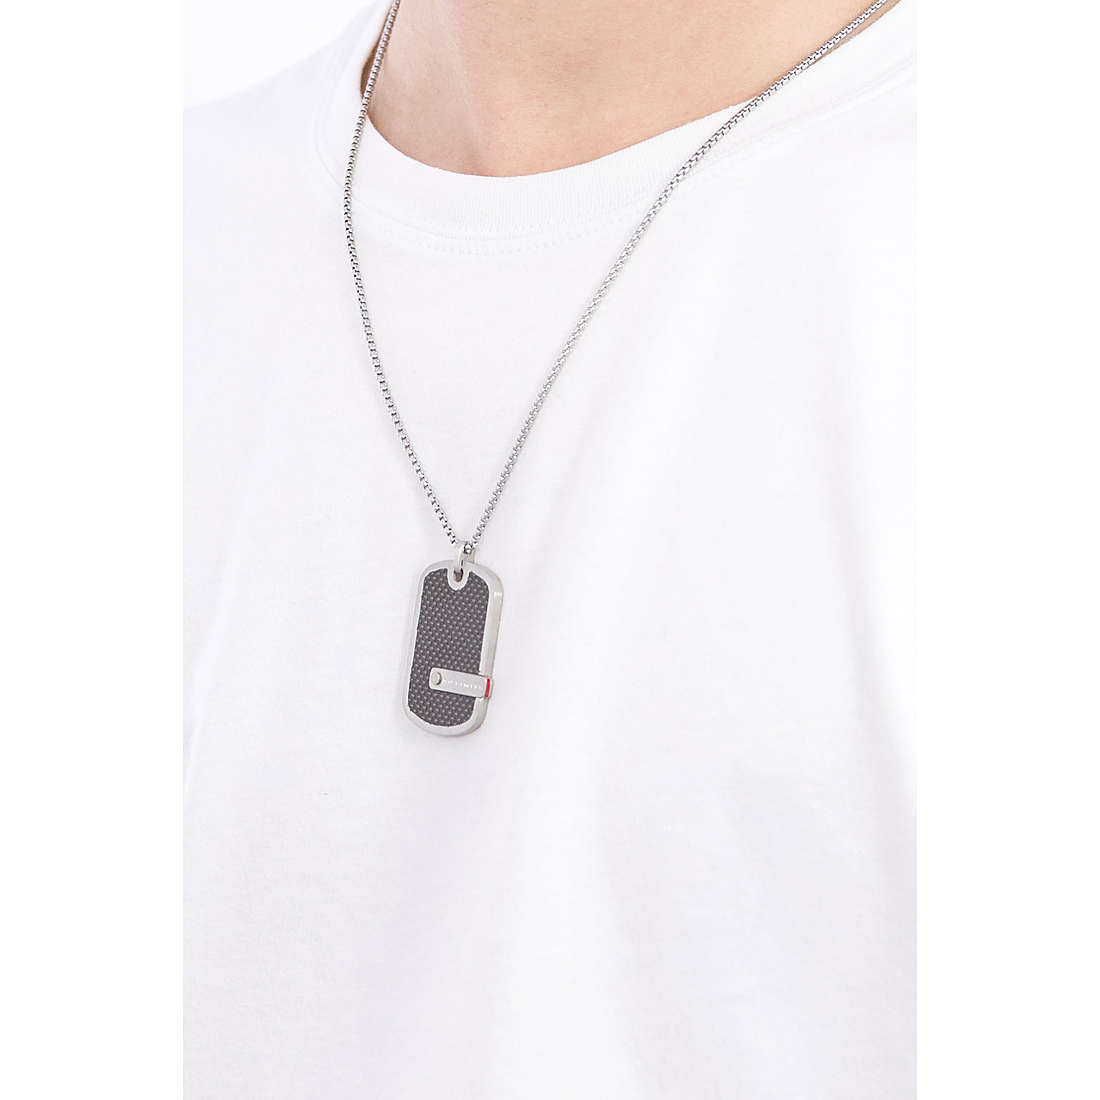 Sector necklaces No Limits man SARG01 wearing